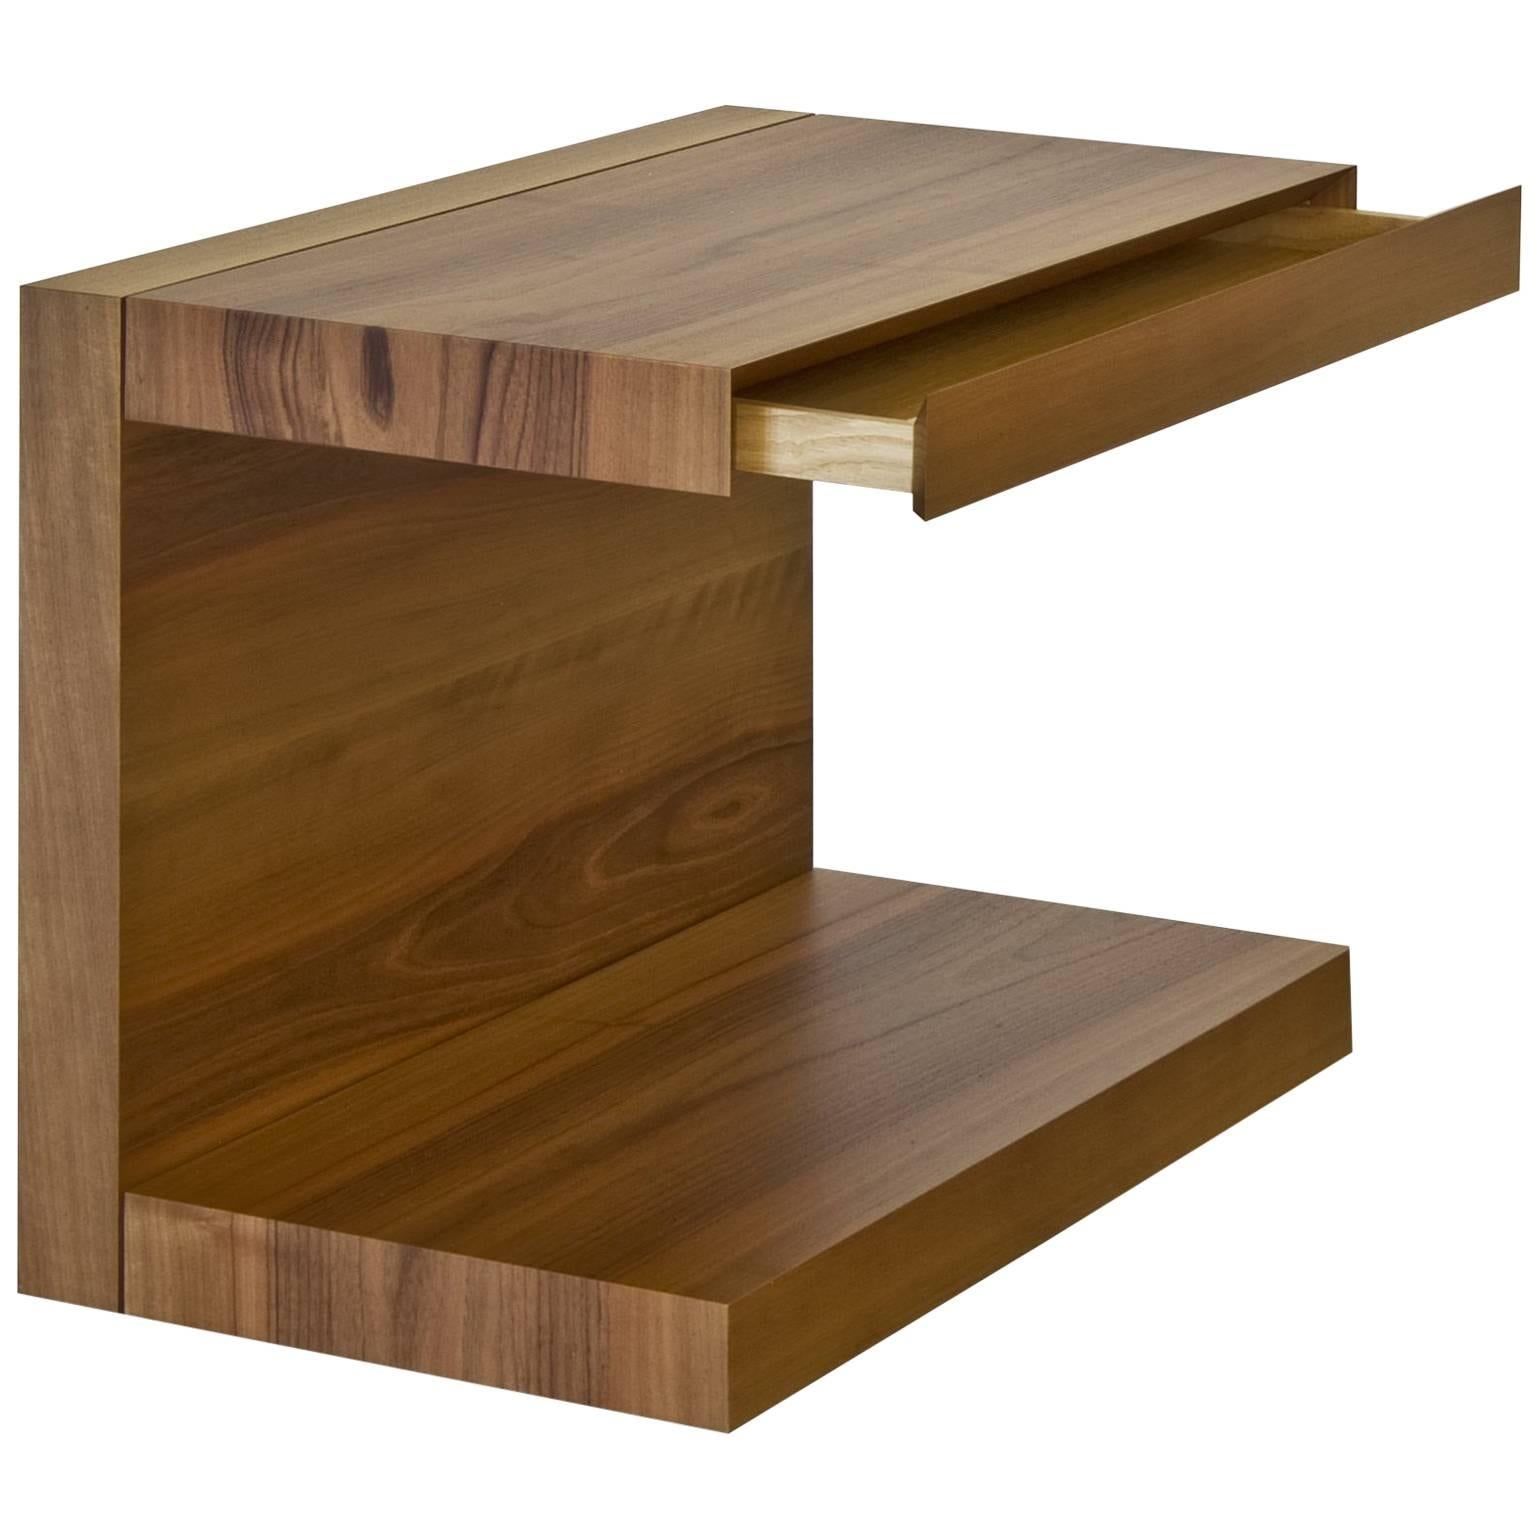 "Scomodino" C-Shaped Side Table with Drawer by Dessie' Studio For Sale